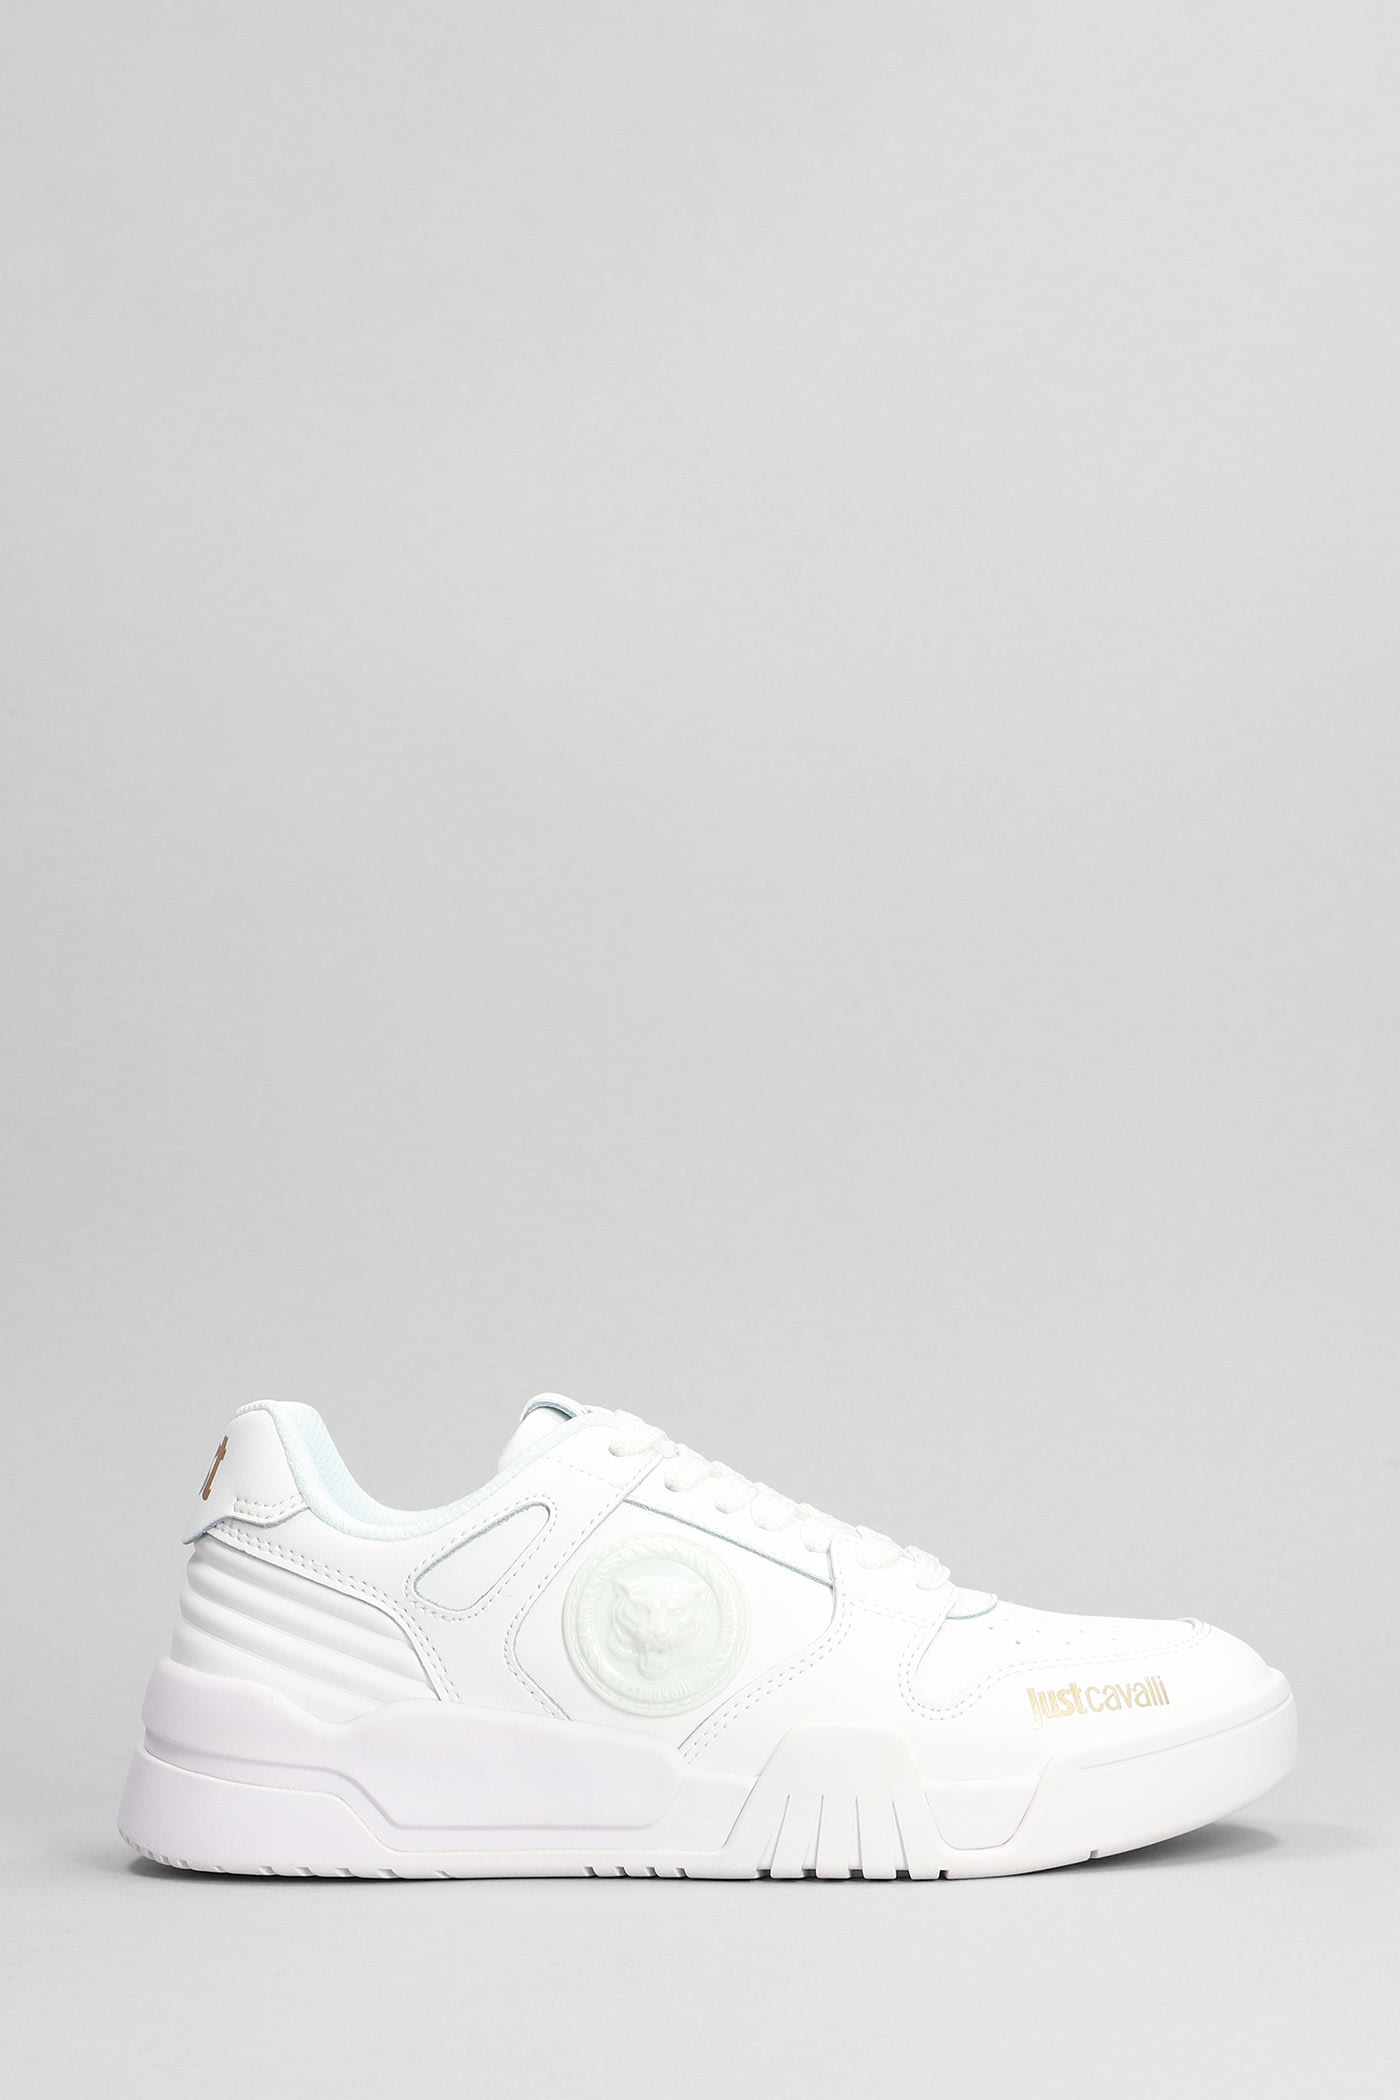 JUST CAVALLI SNEAKERS IN WHITE LEATHER